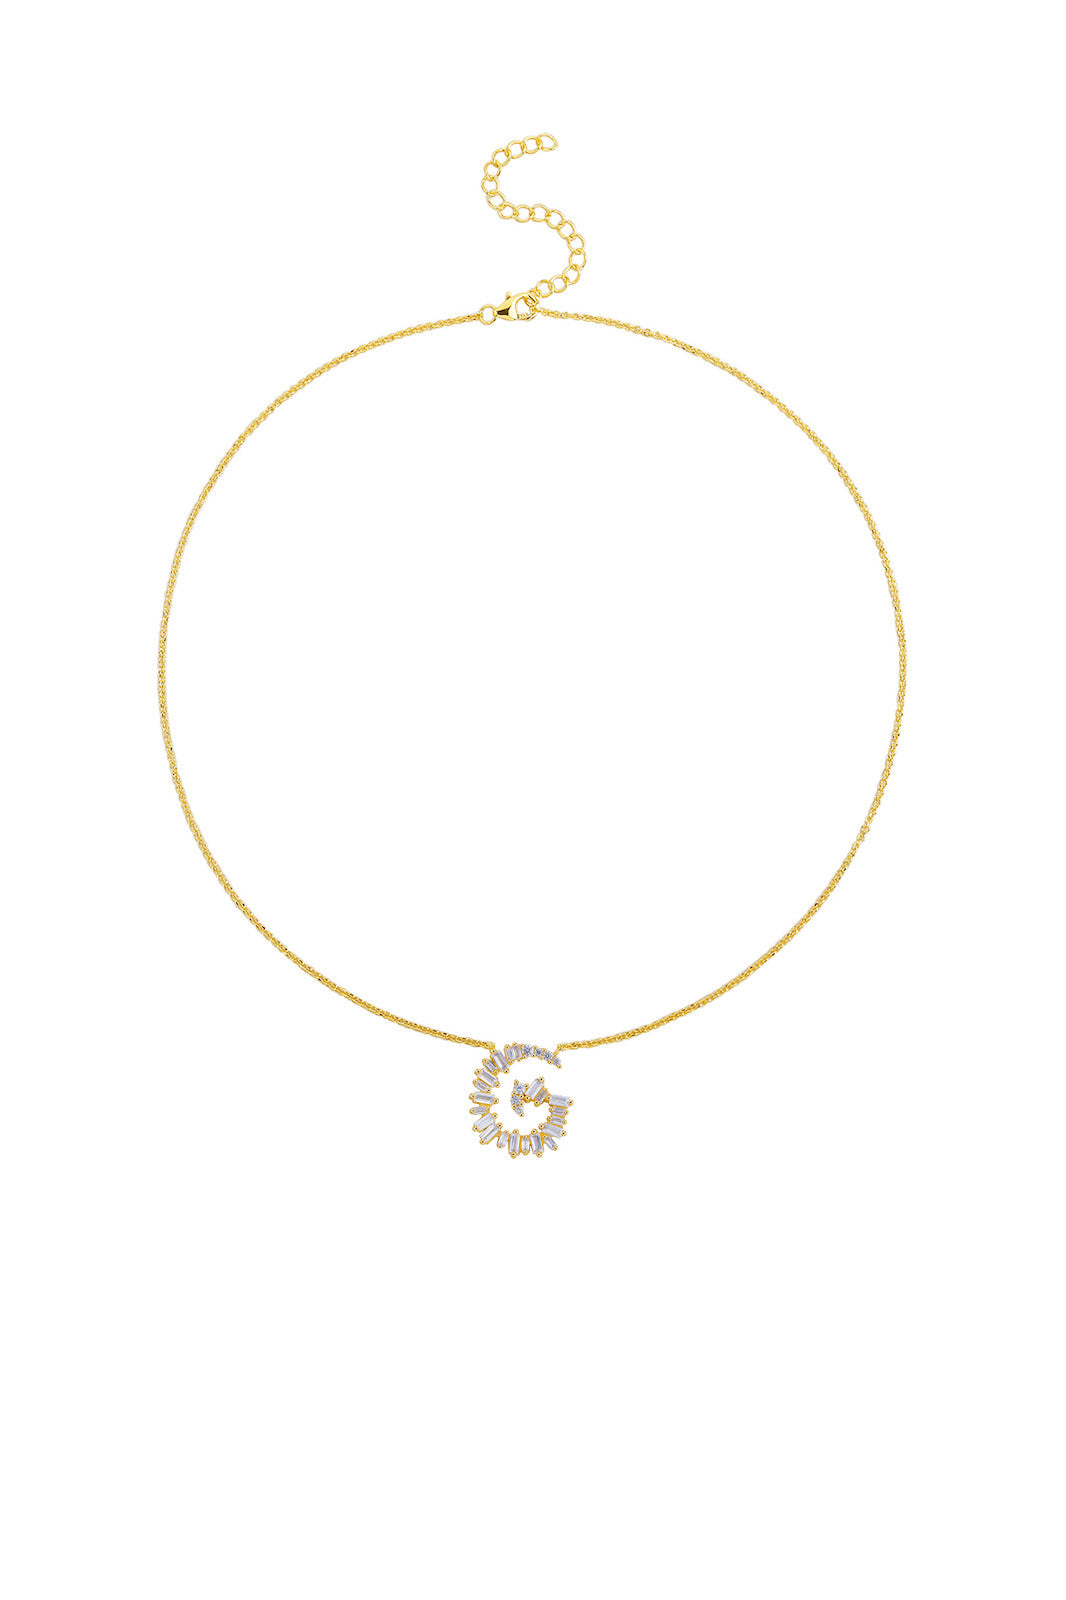 Gold Plated Sterling Silver Initial Necklace - Letter G Detail